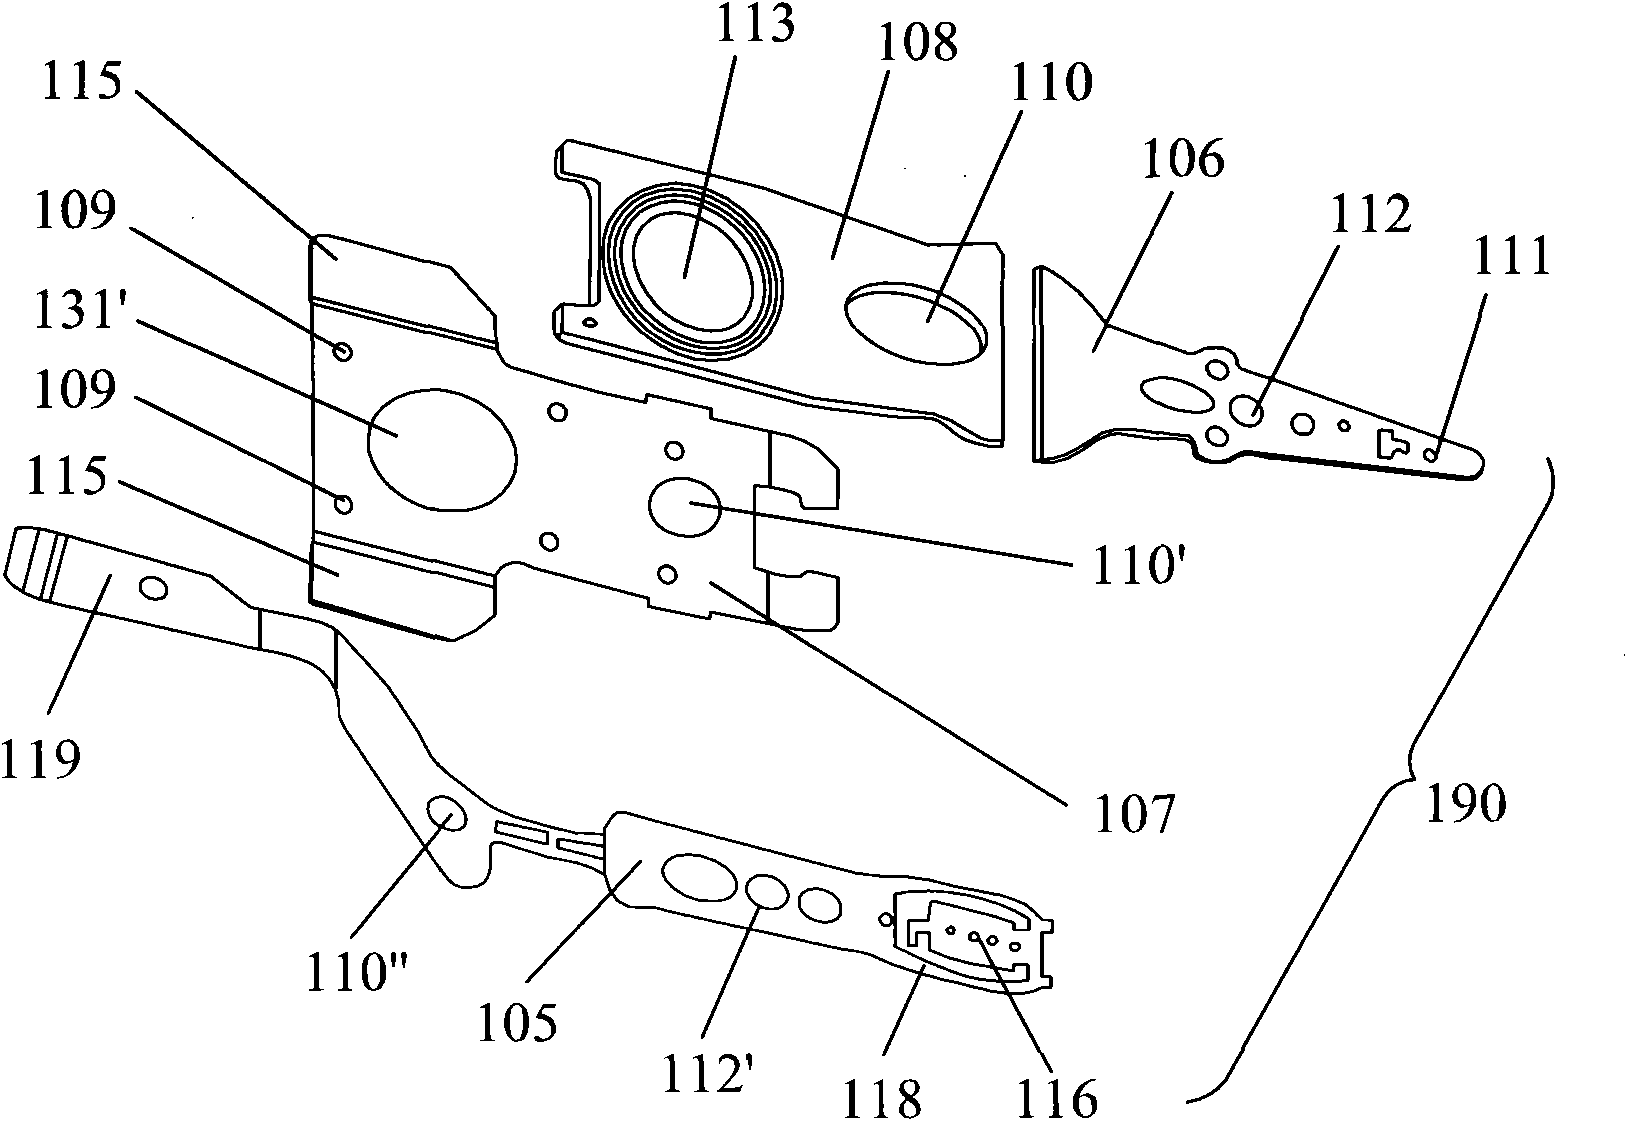 Cantilever part, head gimbal assembly and disc driving unit